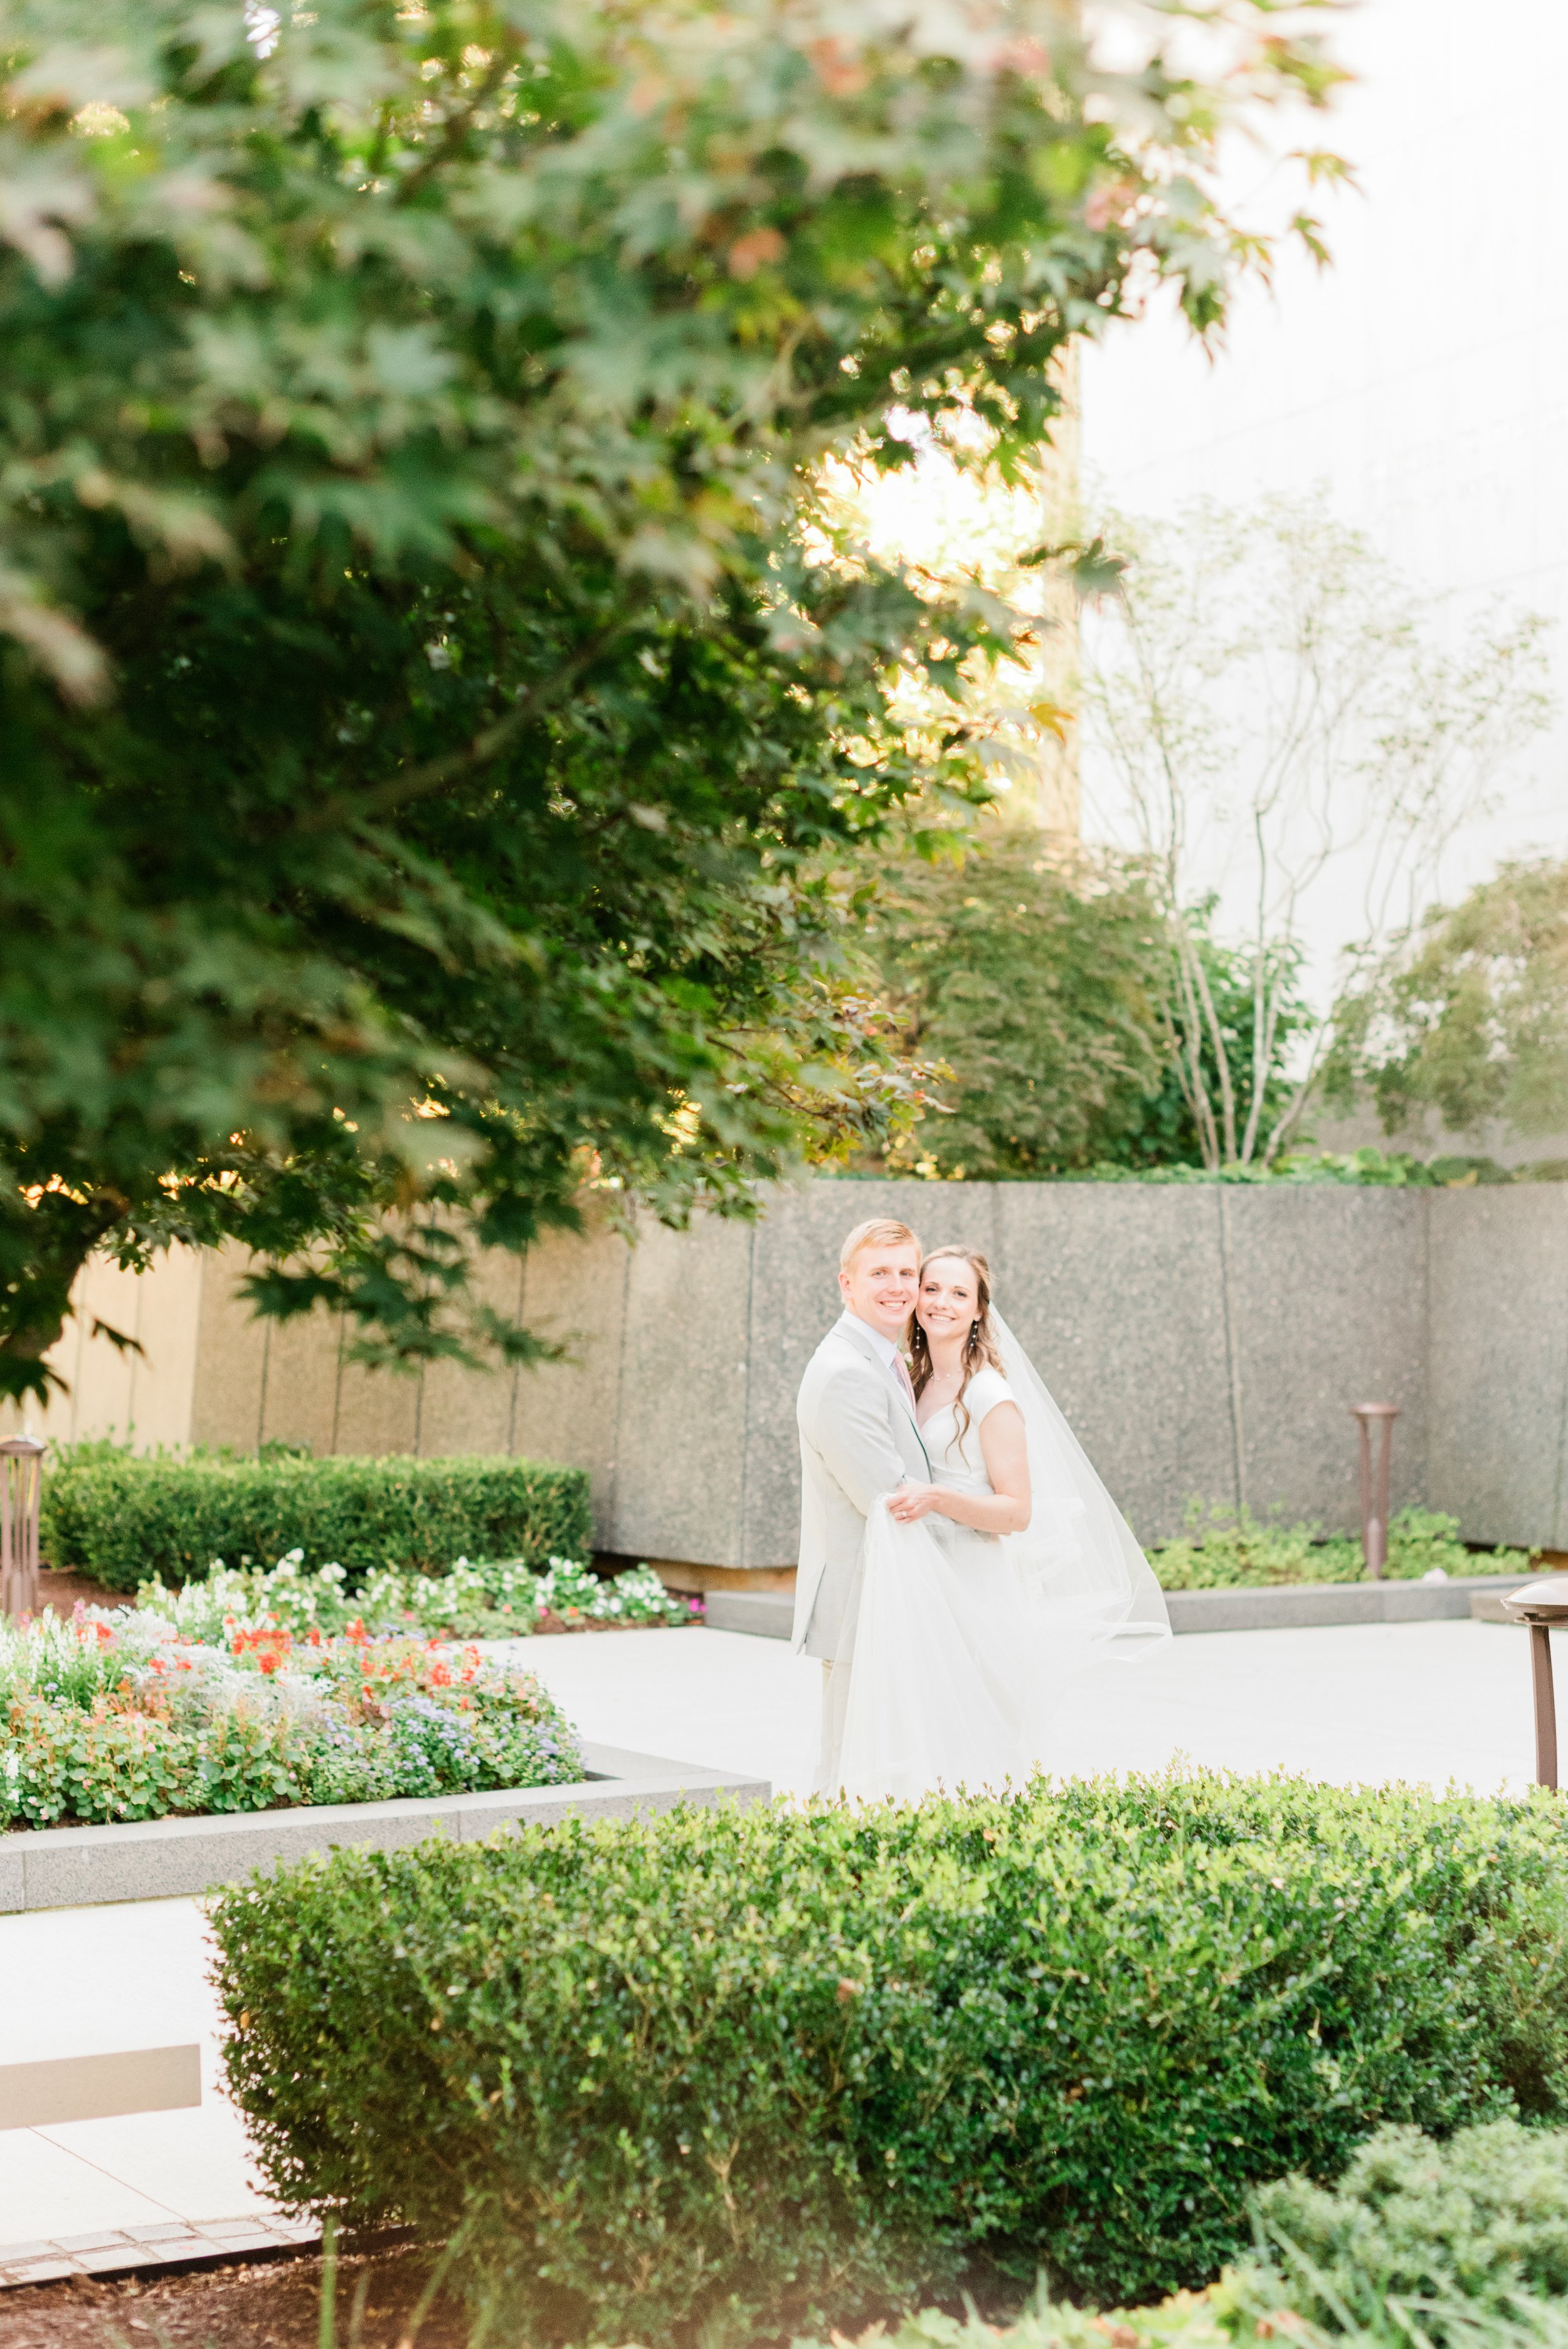  A happy new bride and groom pose for newlywed photos on the Atlanta LDS temple grounds. #marylandweddingphotographer #atlantaweddingphotographer #brideandgroom #justmarriedphotos #bridalportraits #weddingdayphotos #LDSweddingphotographer #templegrou